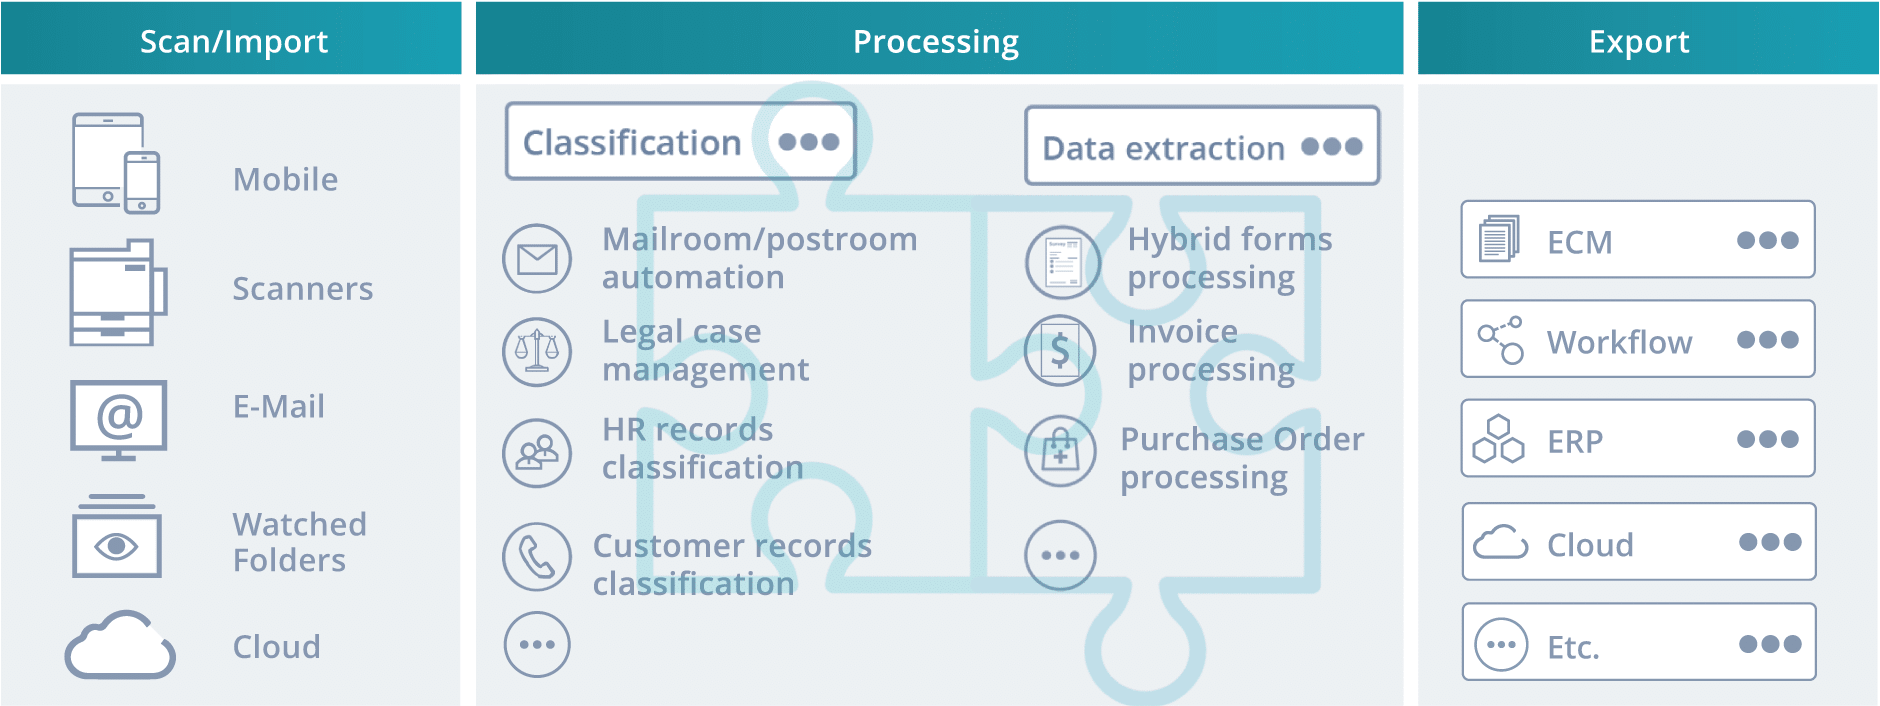 How does the IRISXtract™ software work? You can import documents via scan clients, electronic files, e-mail or cloud. The the software classifies the documents and/or extracts data it in a digital mailroom or business process solution (Mailroom/postroom automation, Legal Case management, HR records classification, Customer records classification, Invoice processing, hybrid forms processing, purchase order processing ..) You can then export the data and documents to your ECM, Workflow, ERP or Cloud system. IRISXtract™ helps you move towards a paperless office.